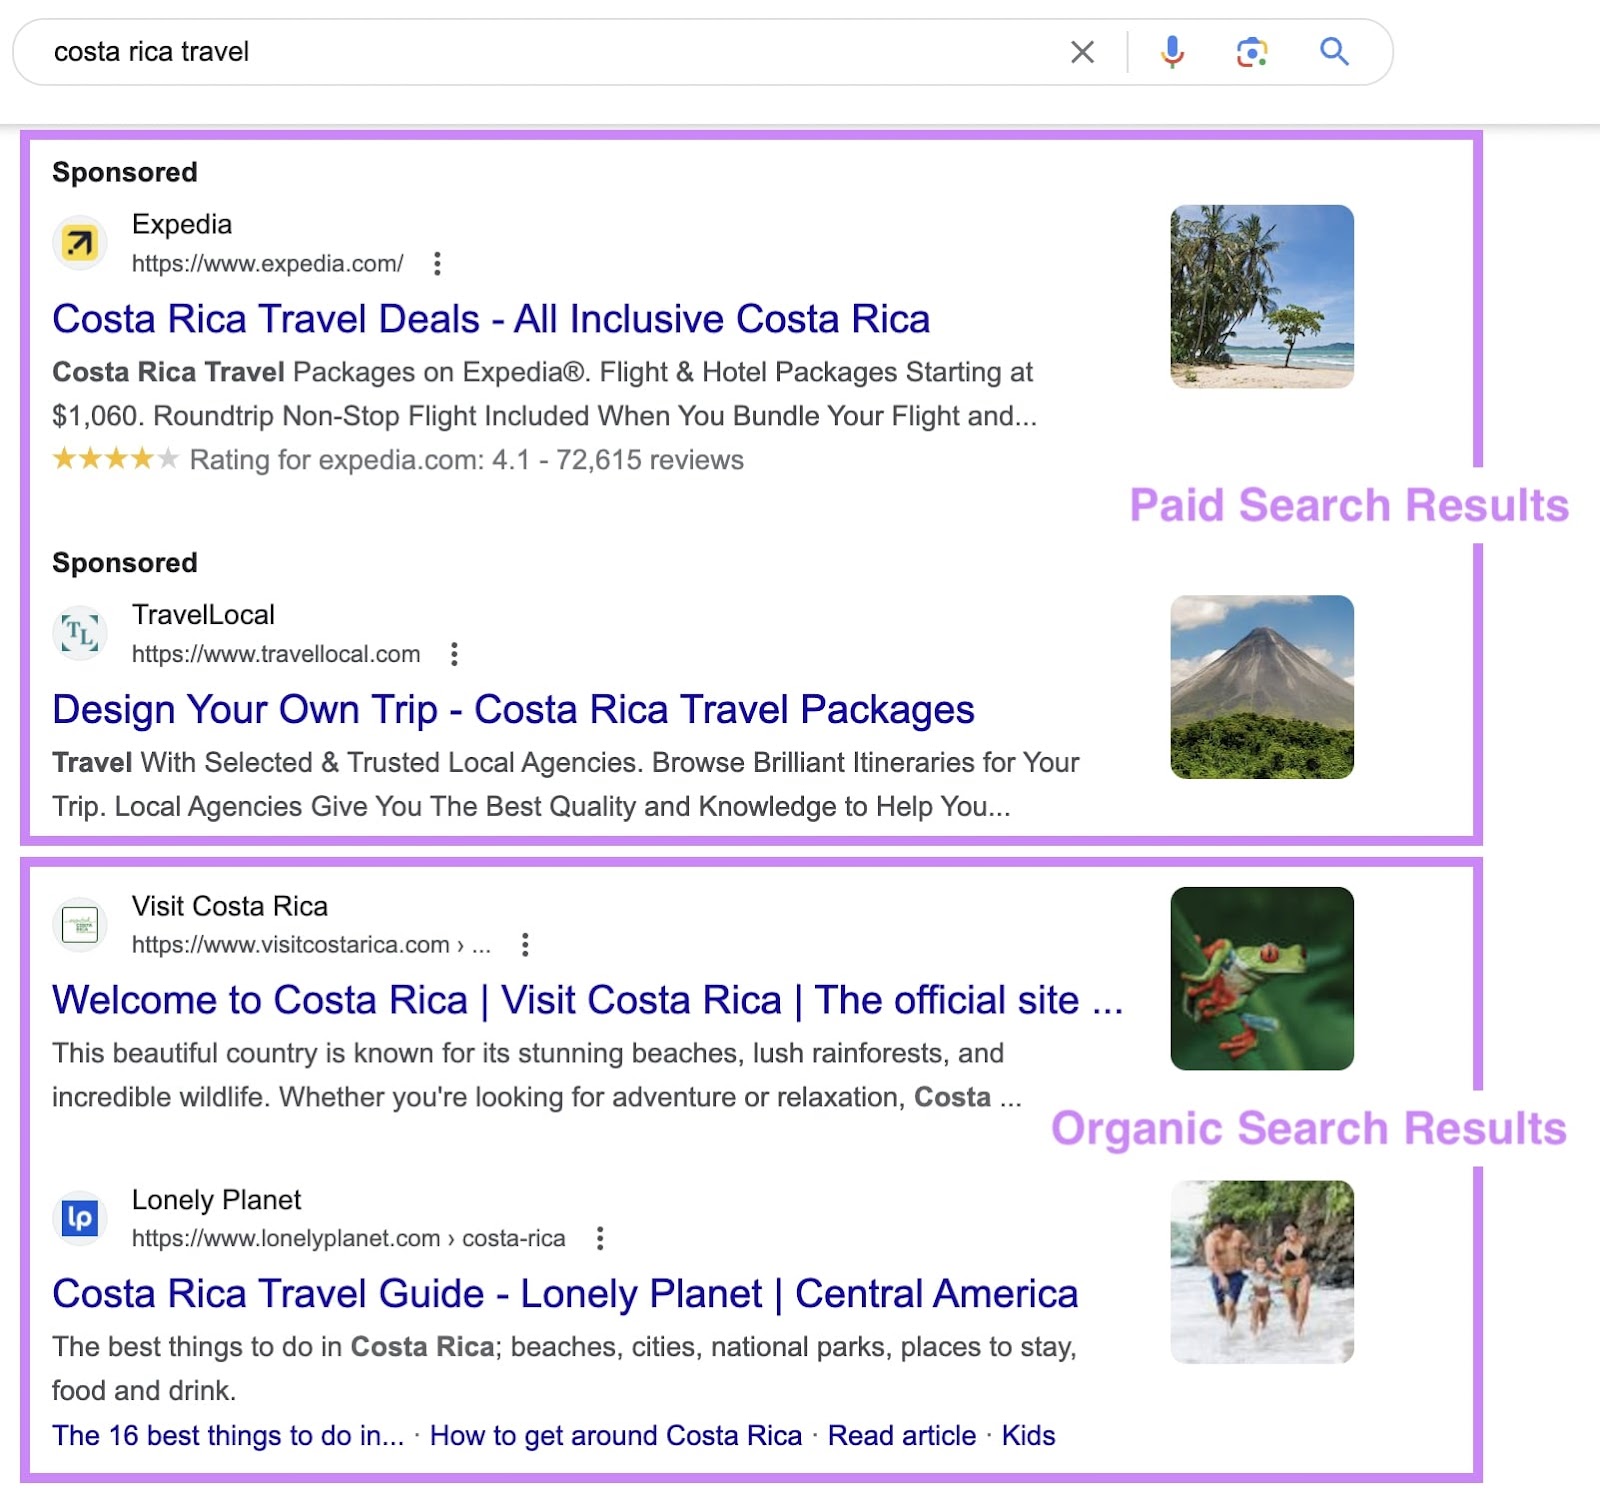 Google SERP with paid and organic search results